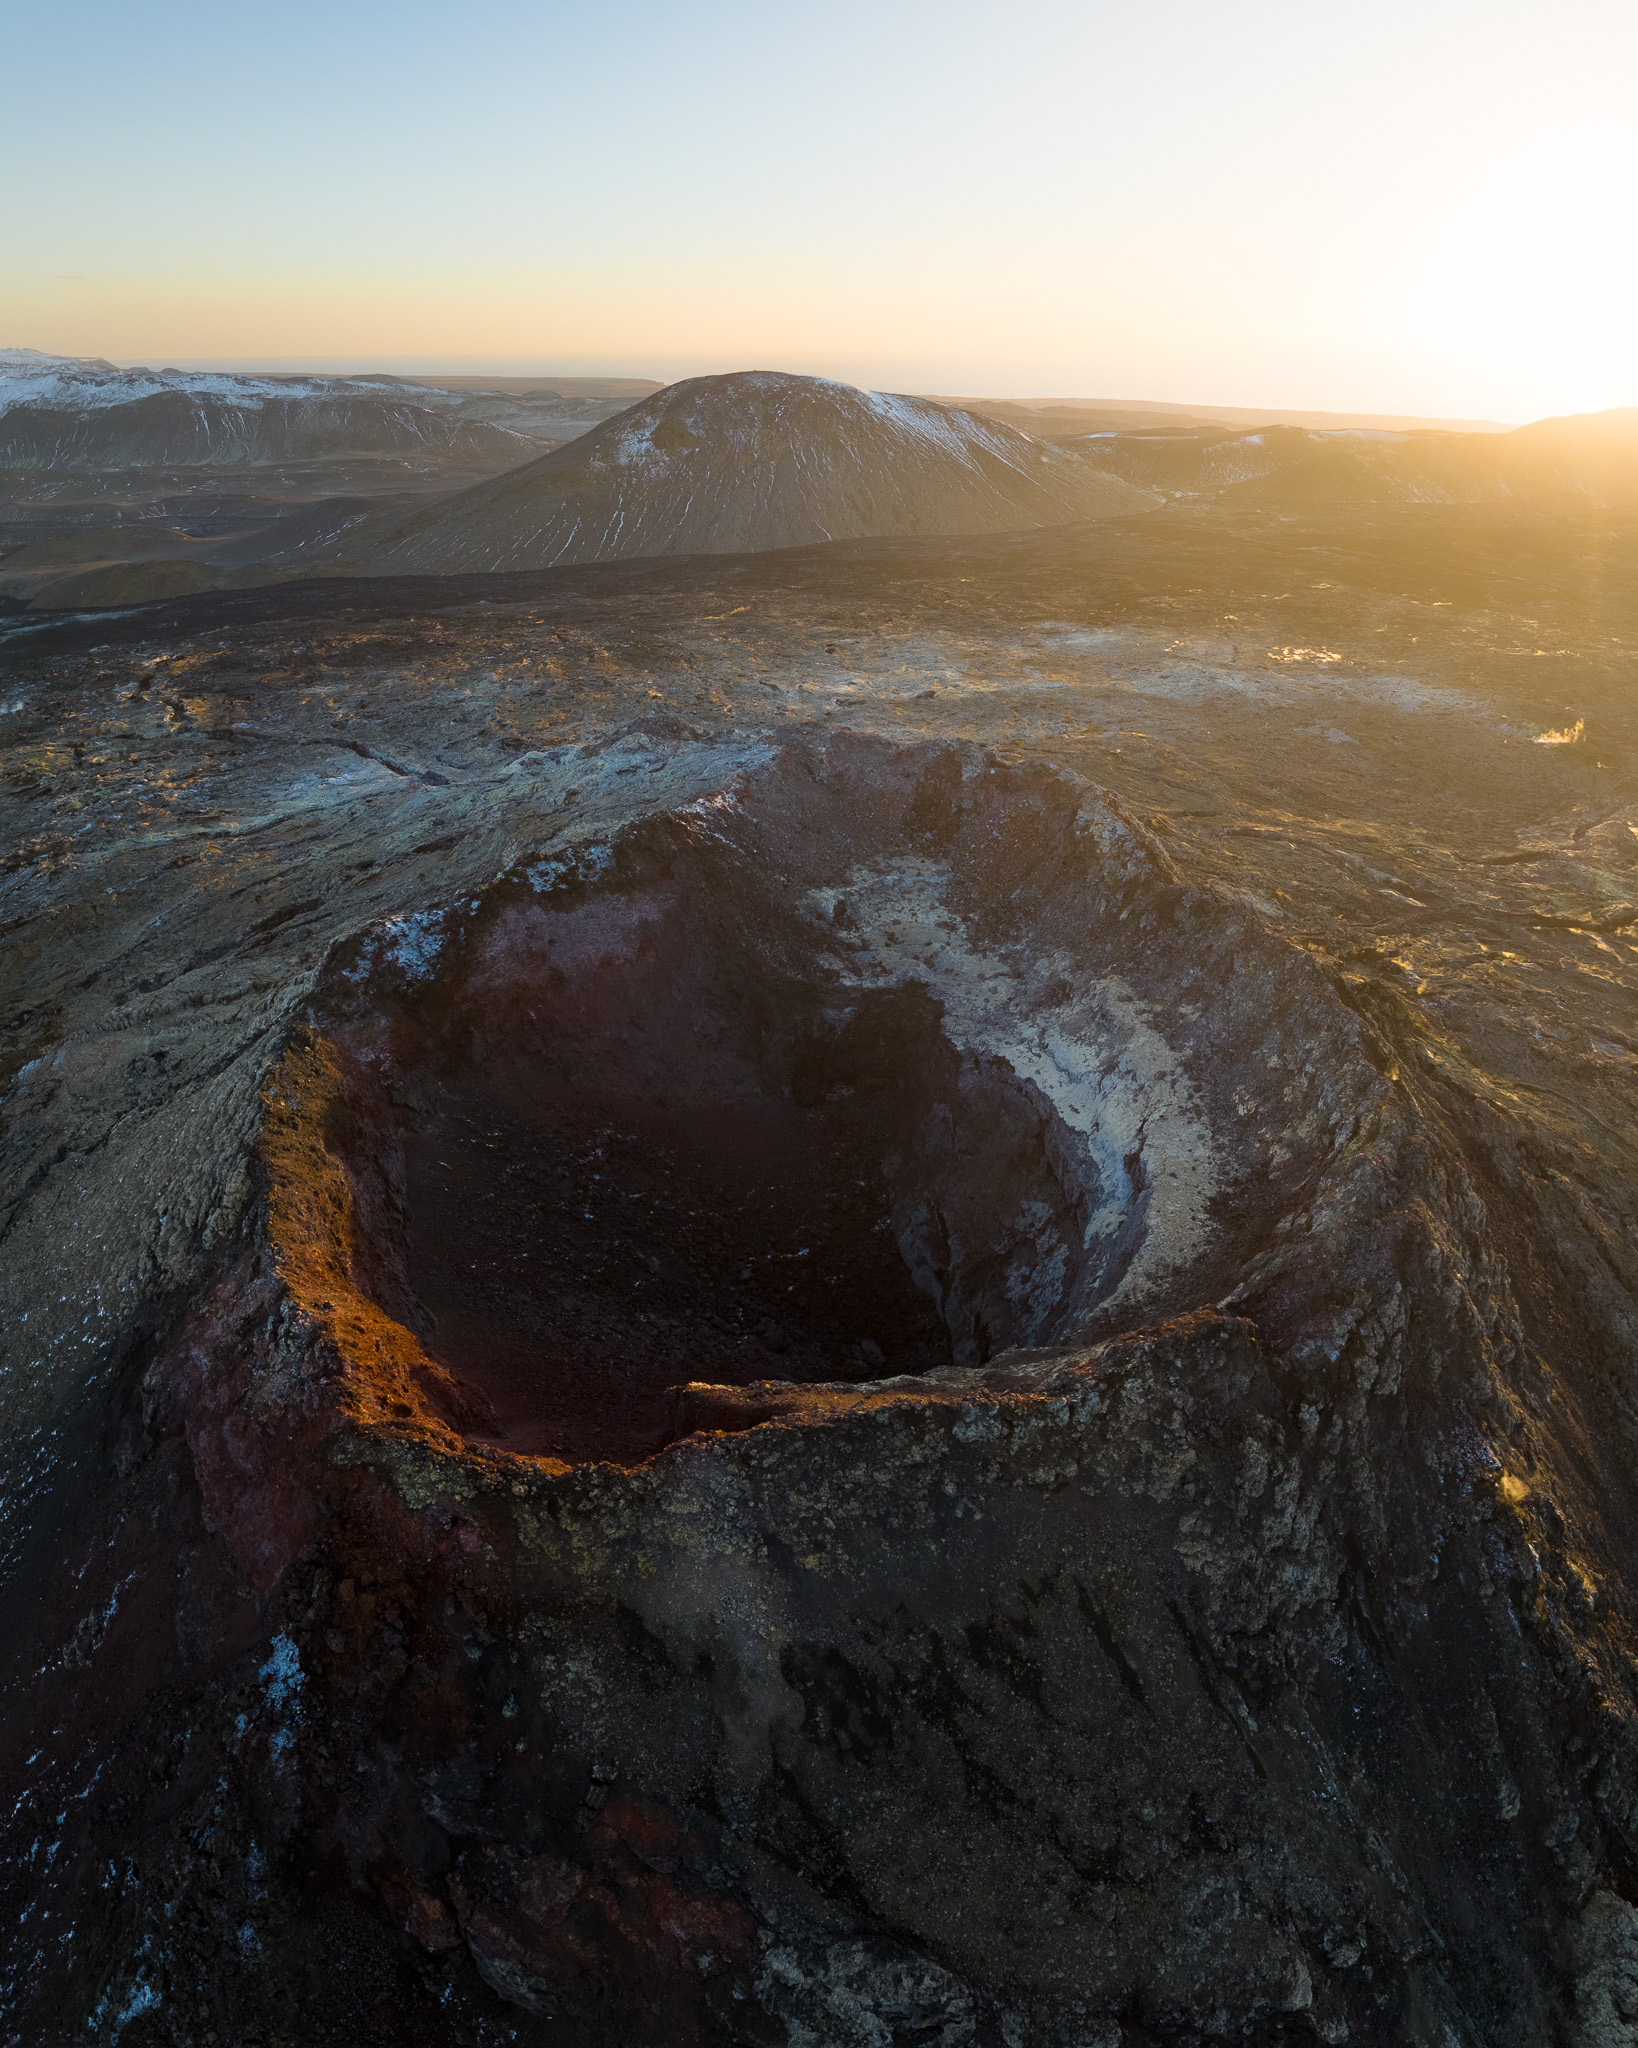 3 Years Of Photographing Eruptions In Iceland - What I’ve Learned